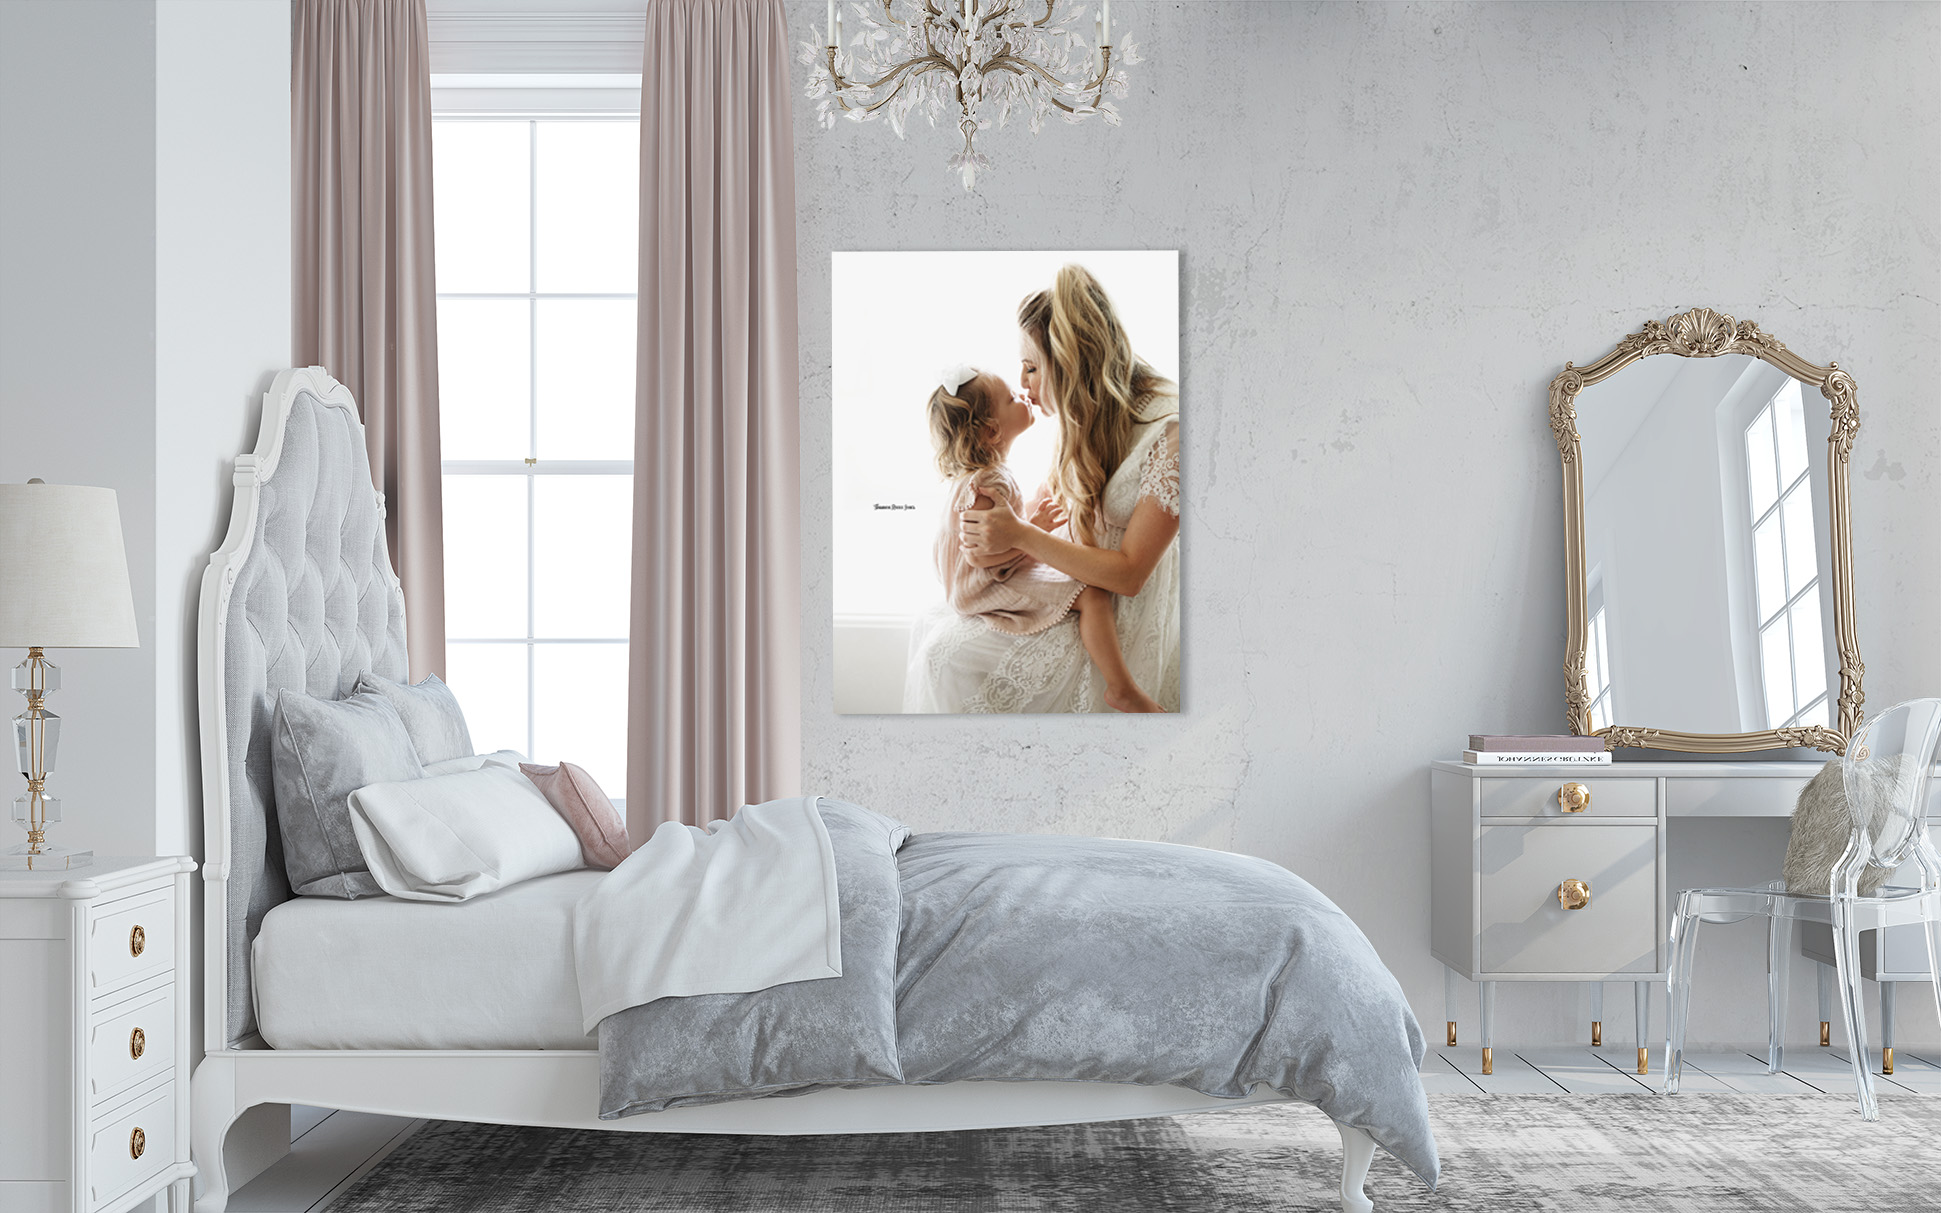 child-friendly ways to beautify your home in winter, canvas of mother and daughter hanging in bedroom